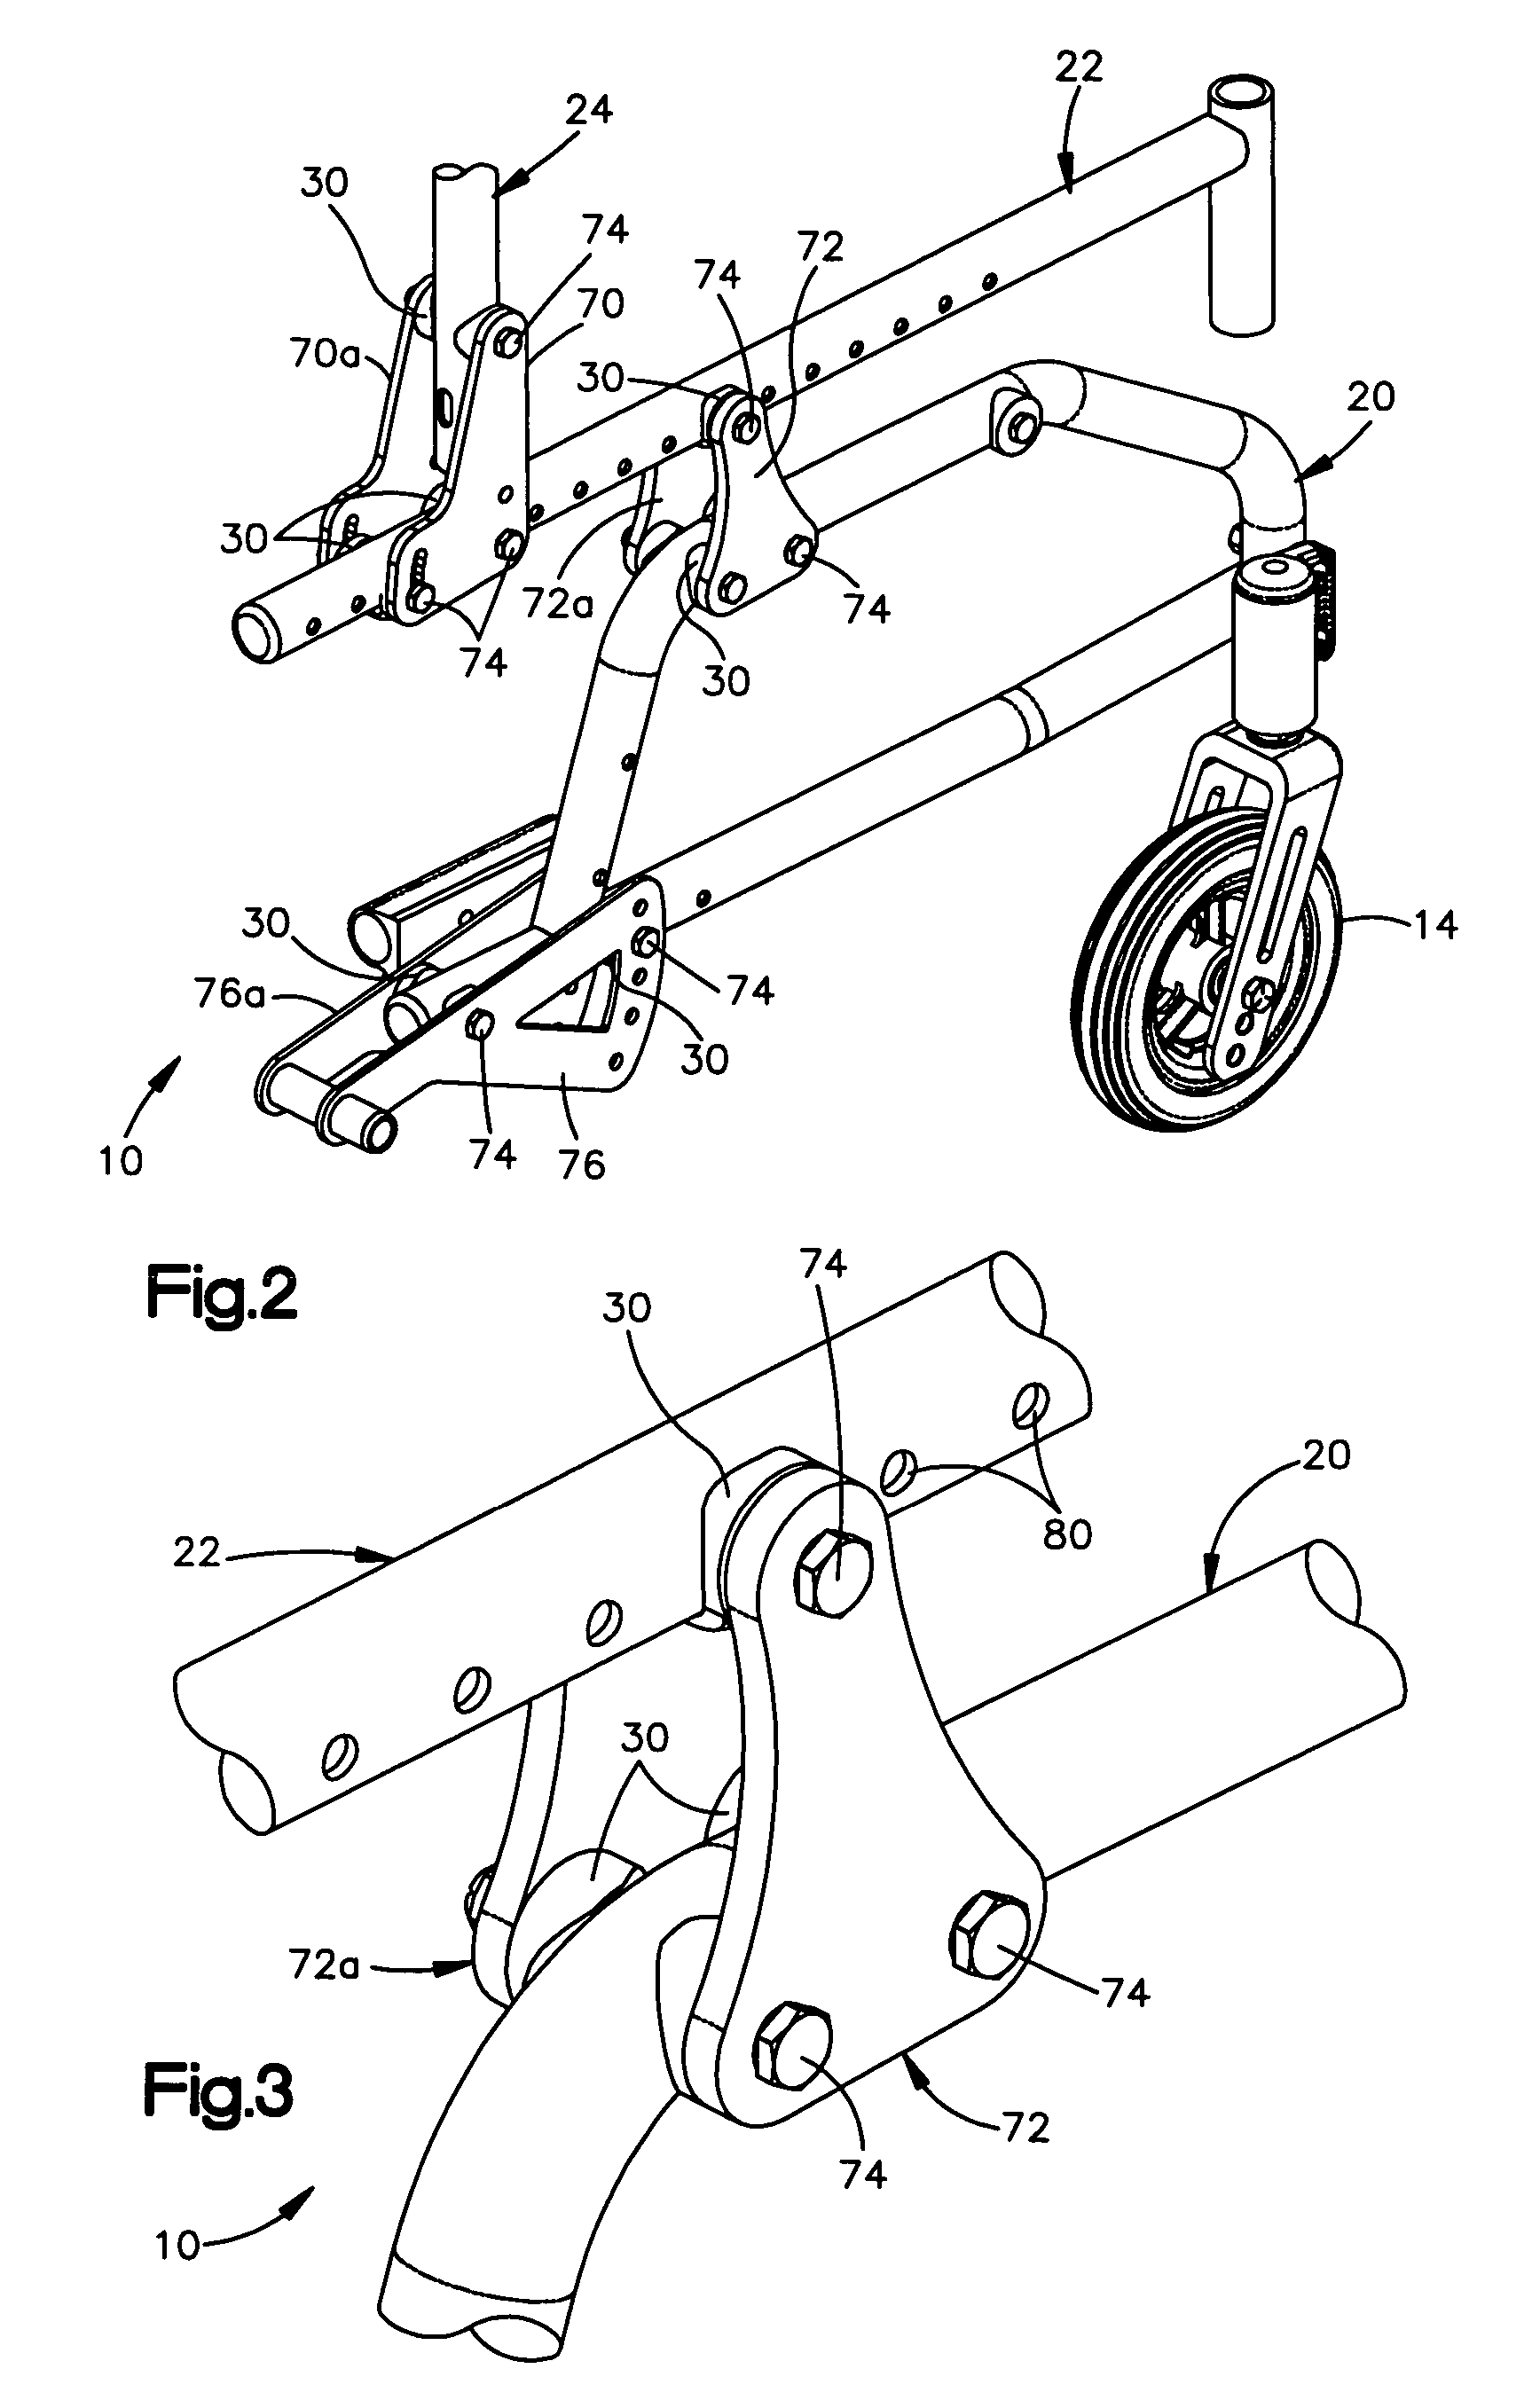 Adjustable personal mobility aid